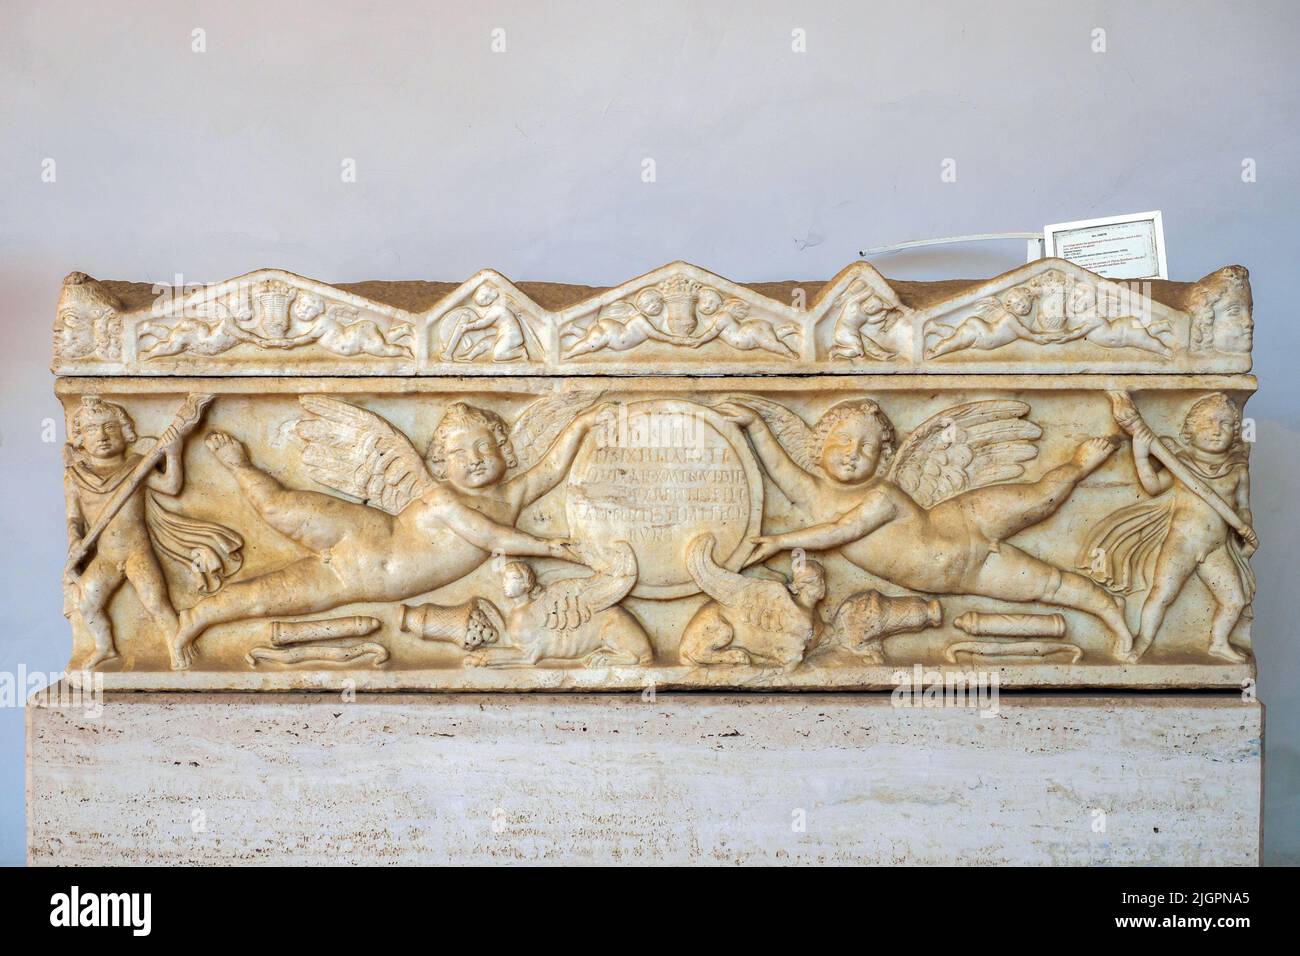 Sarcophagus made by the parents of Flavia Sextiliae, who died at the age of ten years, six months and three days. White marble. 120-150 AD - Rome, Via Aurelia Antica - National Roman Museum - The Baths of Diocletian - Rome, Italy Stock Photo